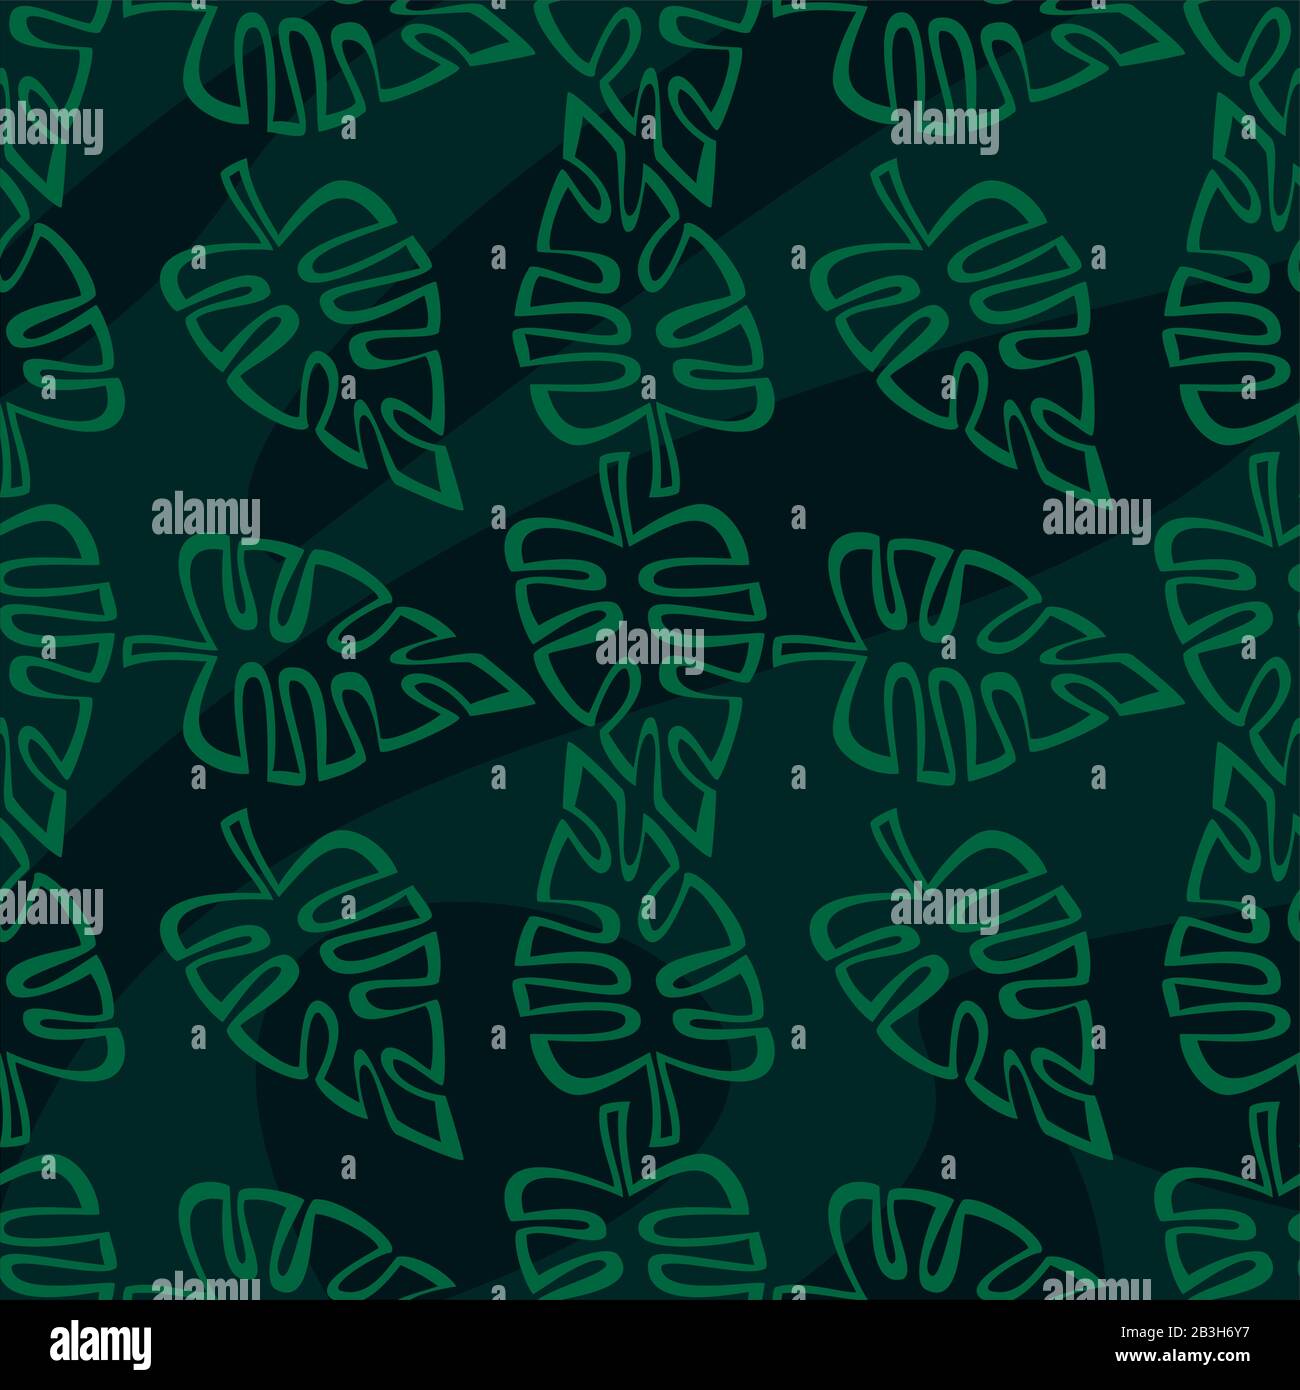 Exotic Tropical Vector Seamless Pattern. Leaves Of Palm Trees, Monstera, Leaves In The Jungle. Hand drawn. For Design, Wrapping Paper, Fabric, Textile Stock Vector